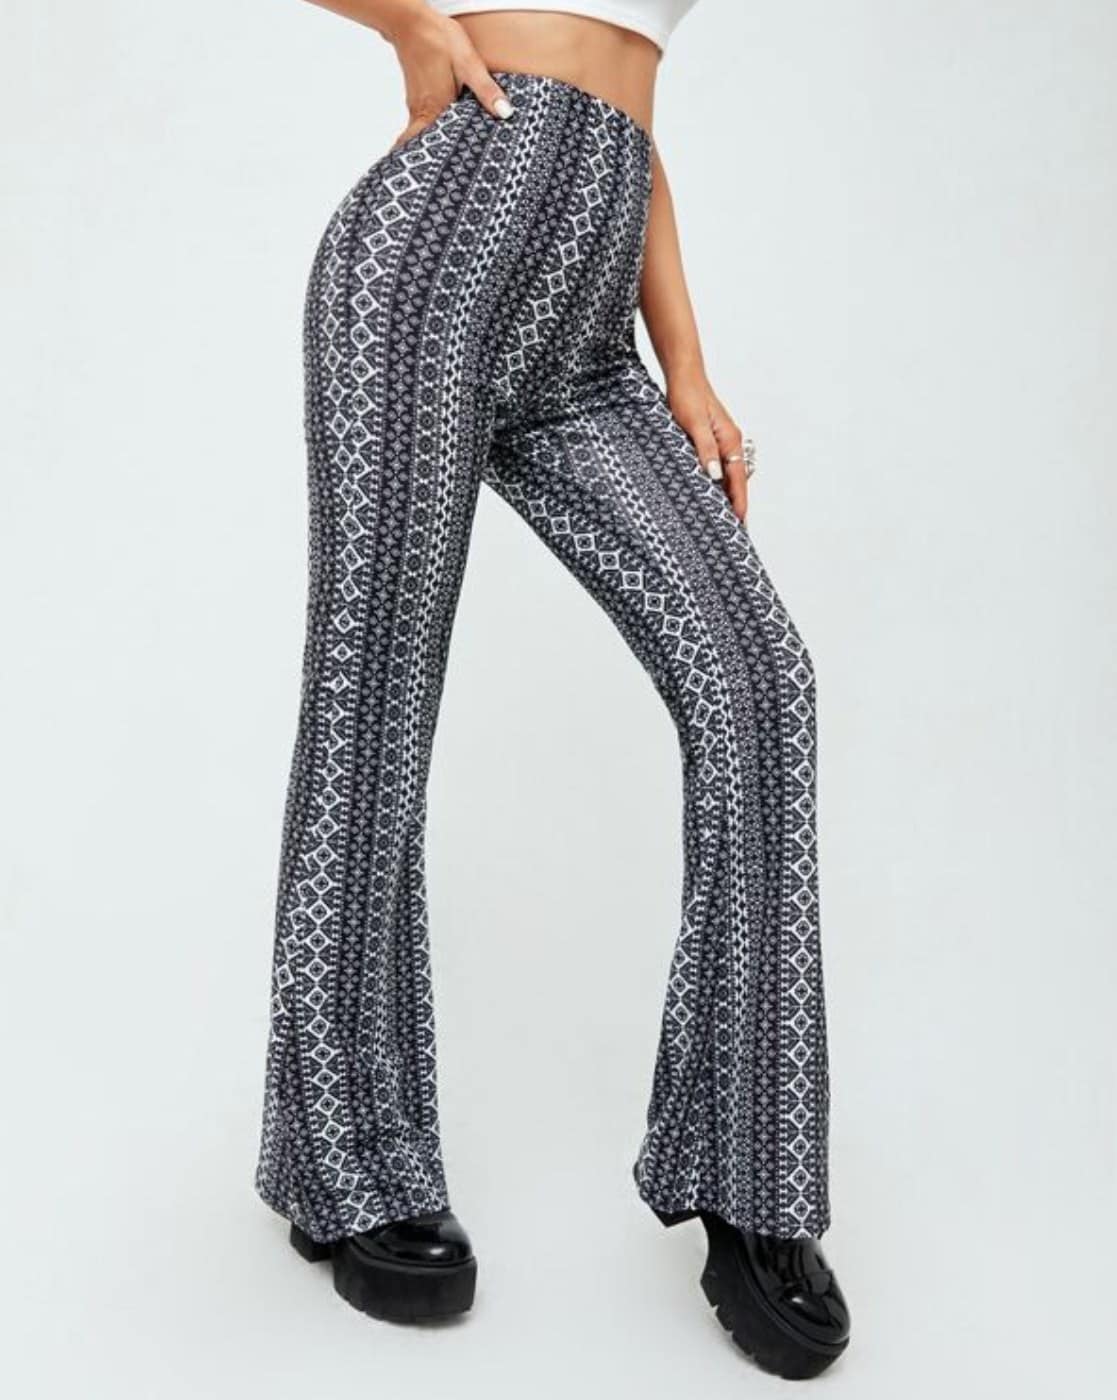 Forever 21 Mixed Print Flared Pants, $22 | Forever 21 | Lookastic